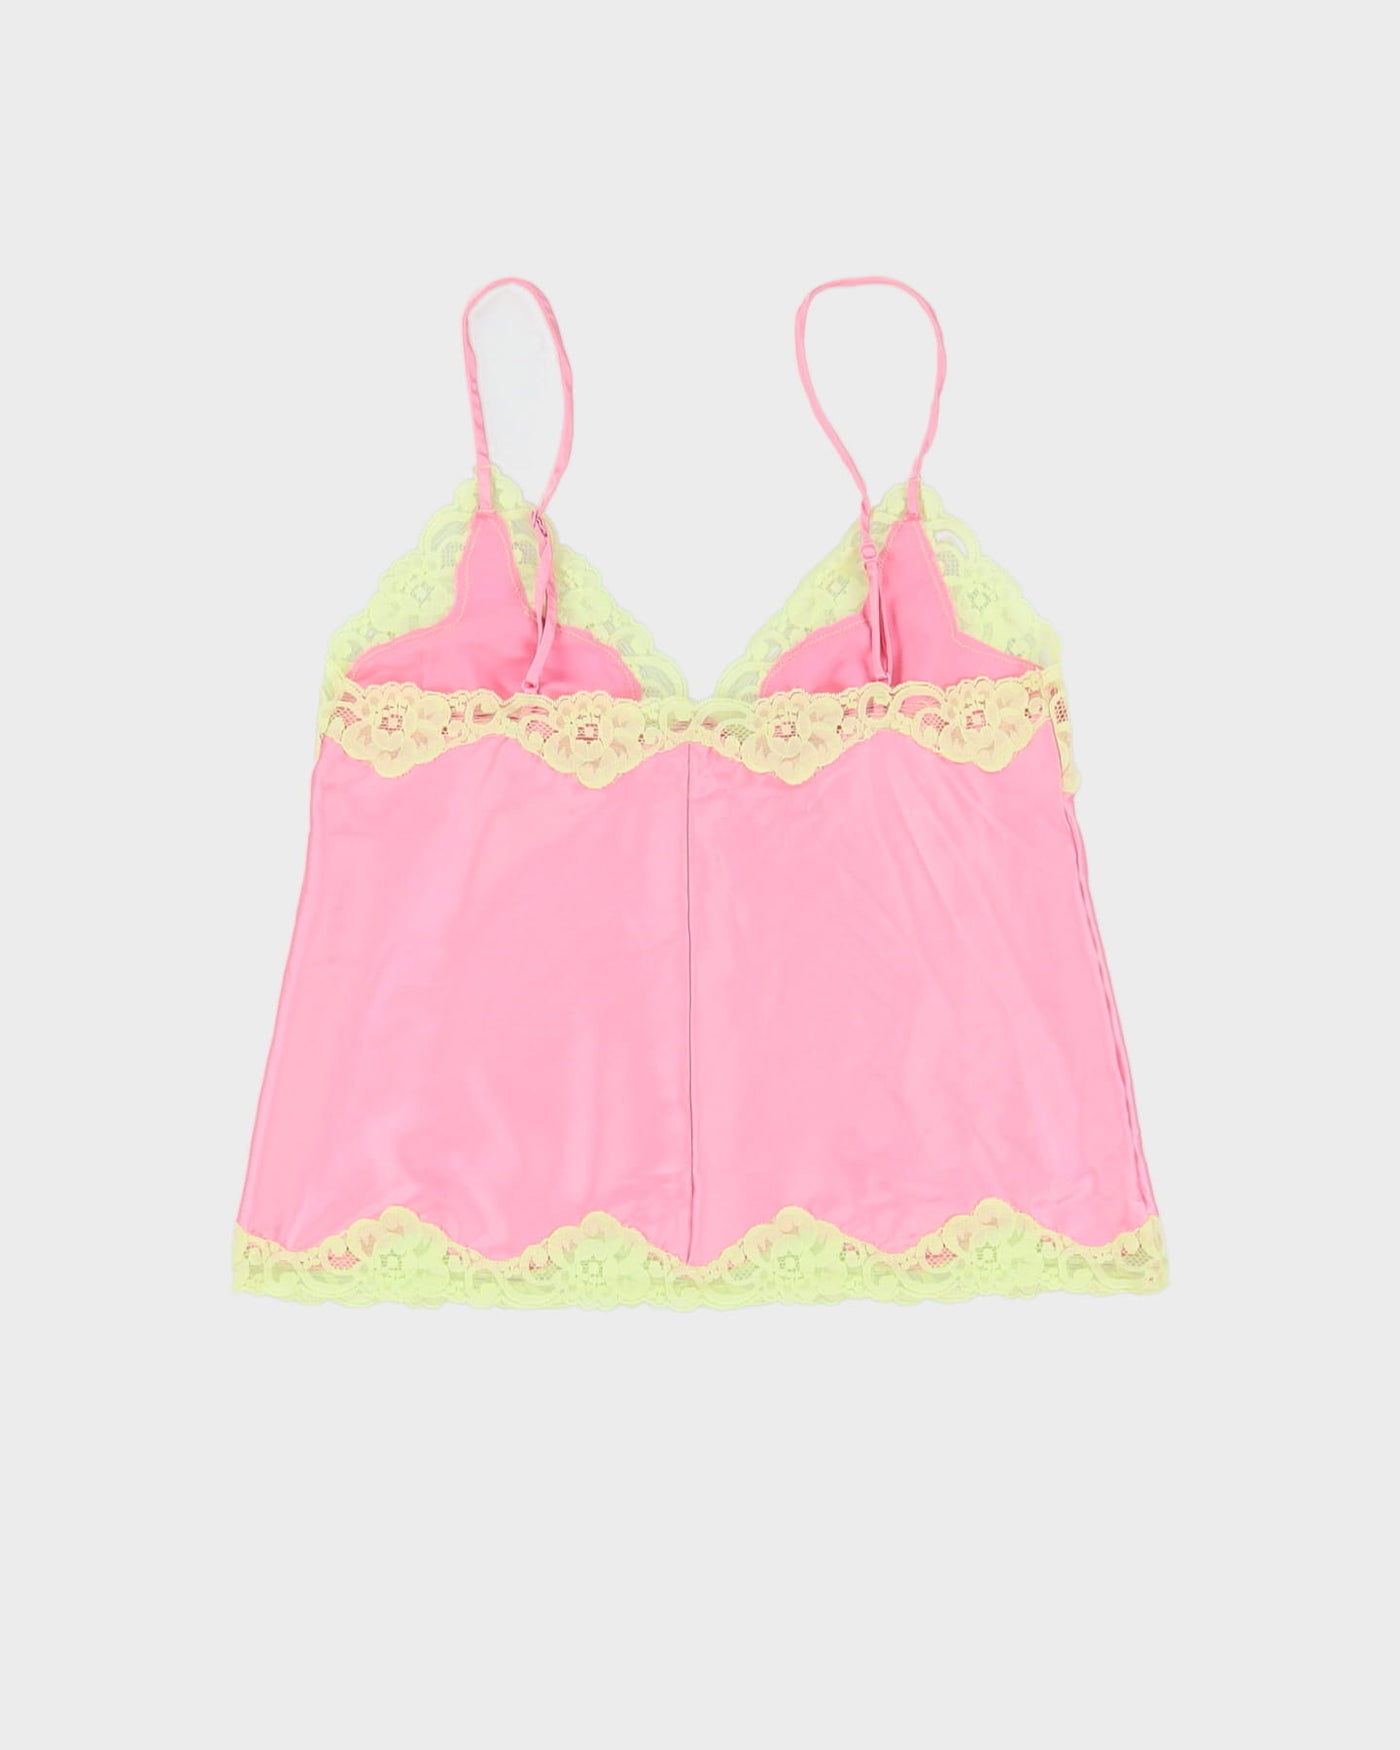 Y2K Pink With Yellow Lace Cami Top - S